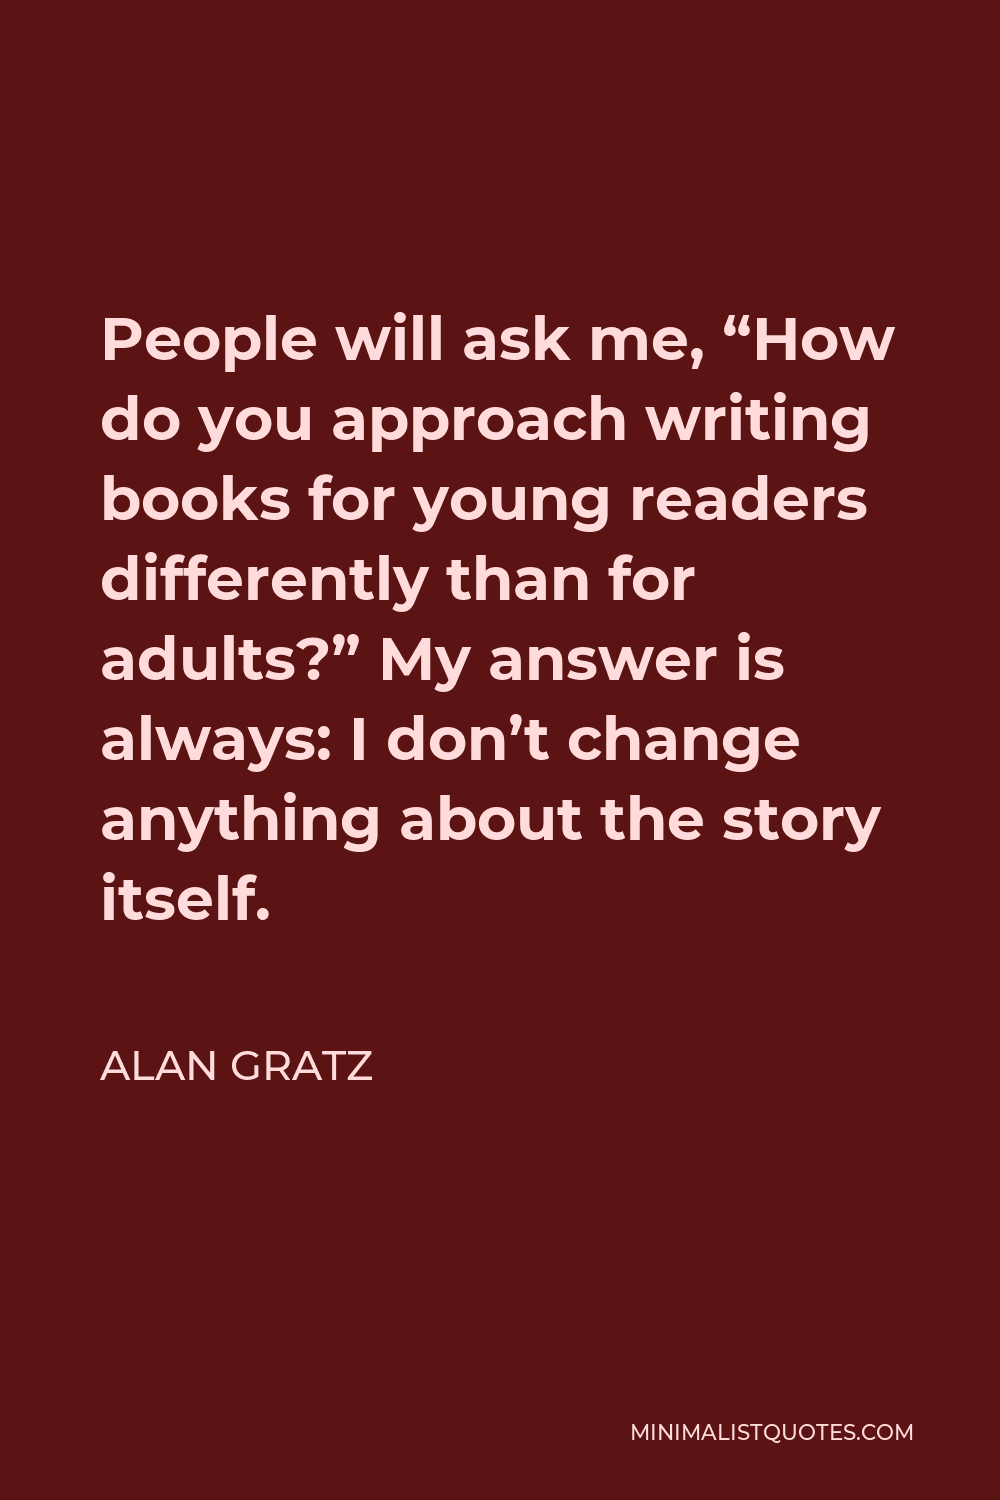 Alan Gratz Quote - People will ask me, “How do you approach writing books for young readers differently than for adults?” My answer is always: I don’t change anything about the story itself.